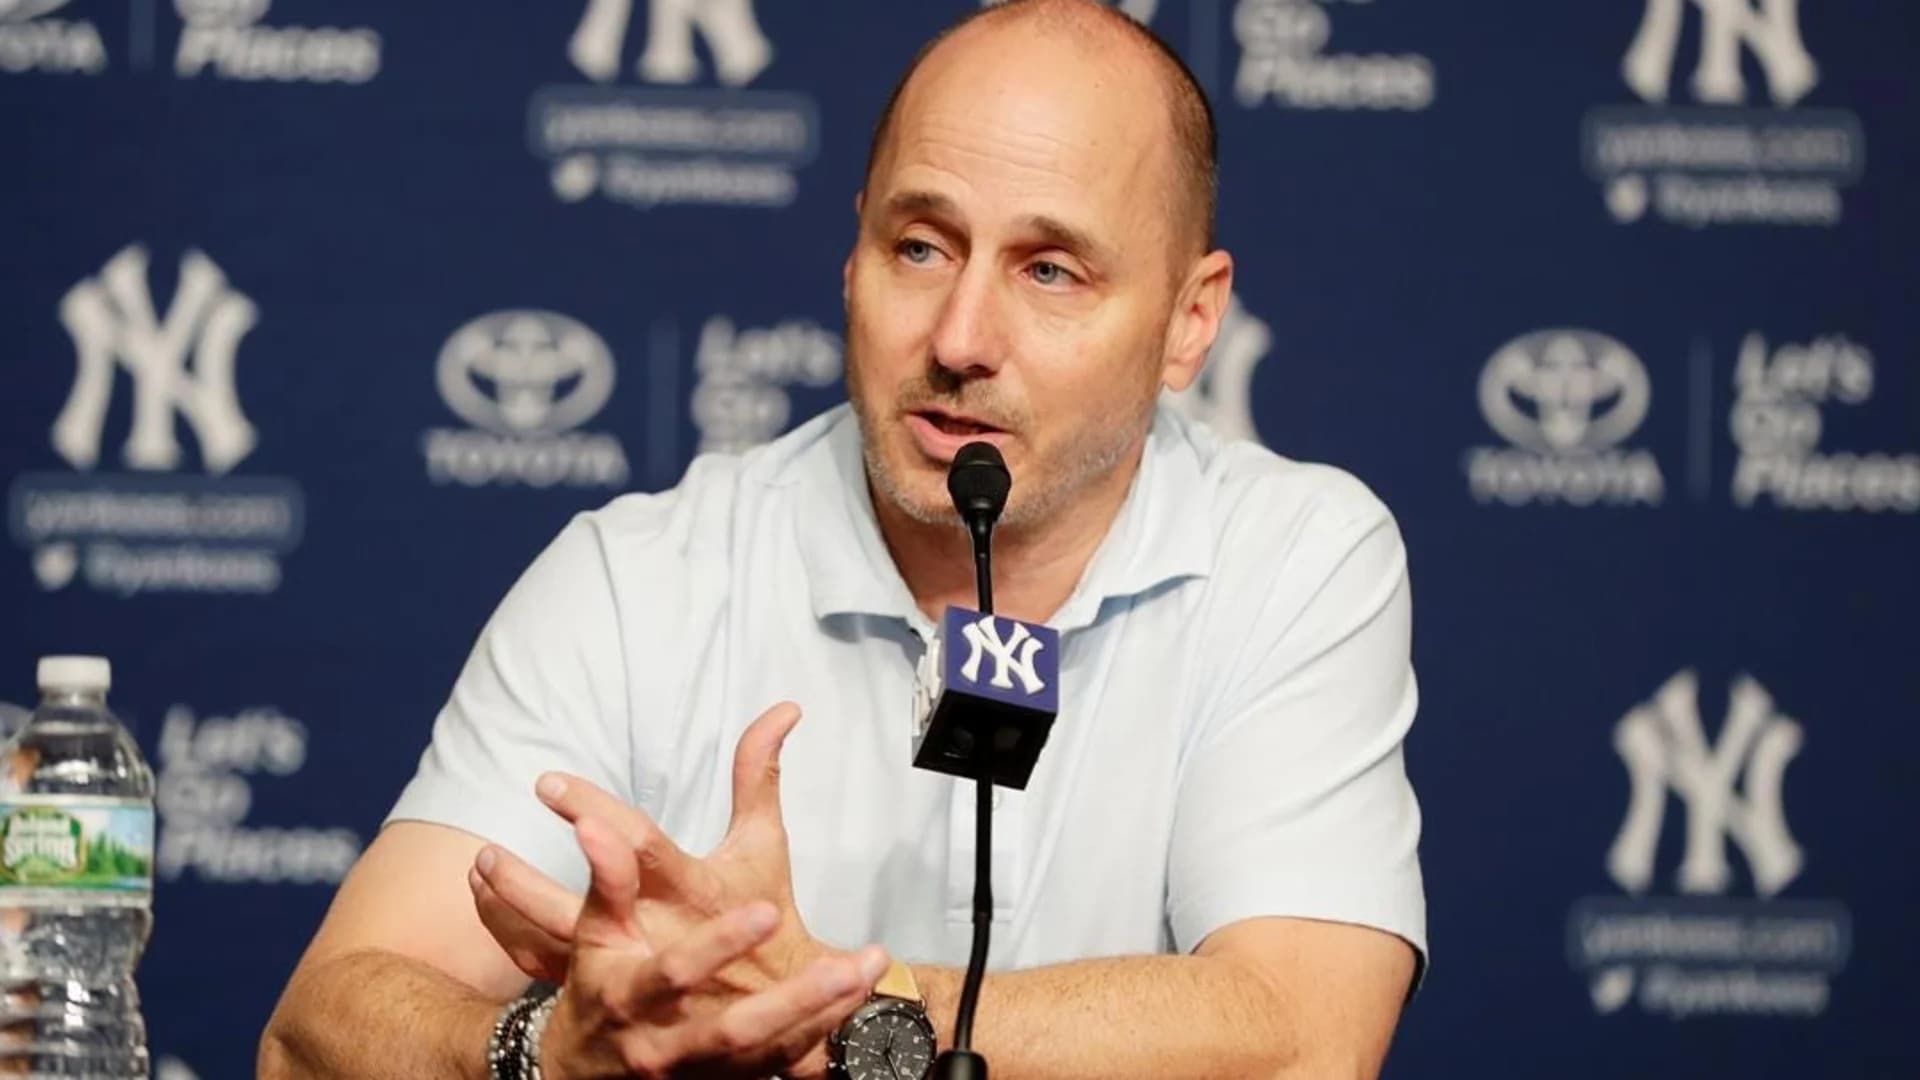 Mix-up involving report of armed man leads police to stop Yankees GM Cashman